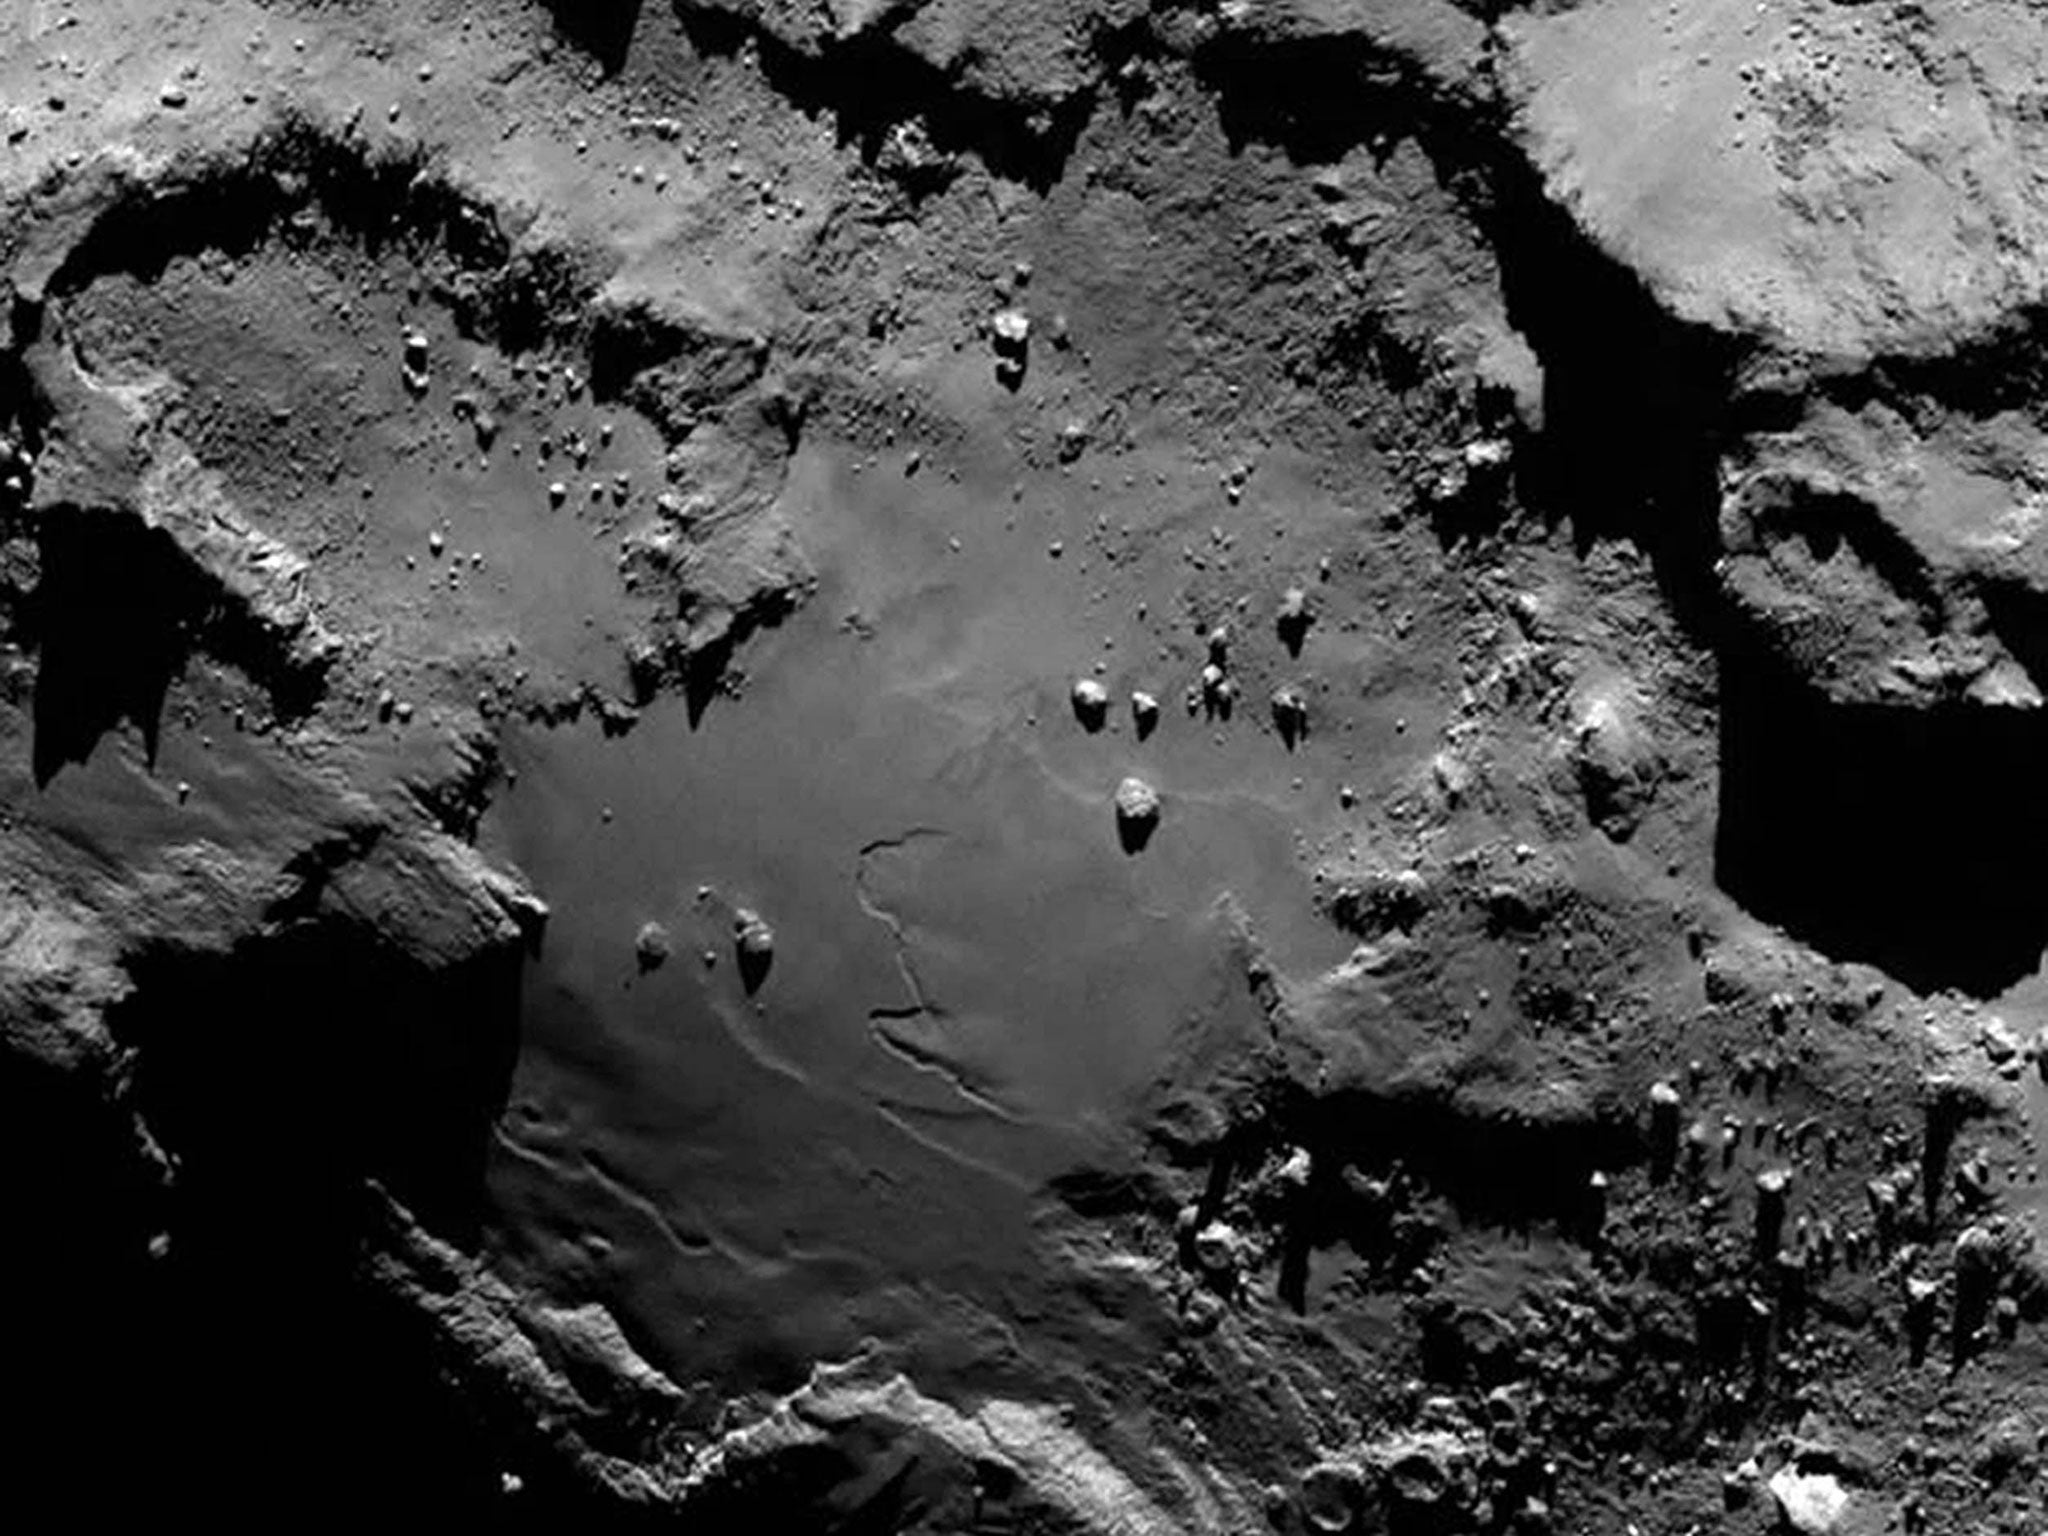 Scientists believe activity by micro-organisms could explain the comet’s features